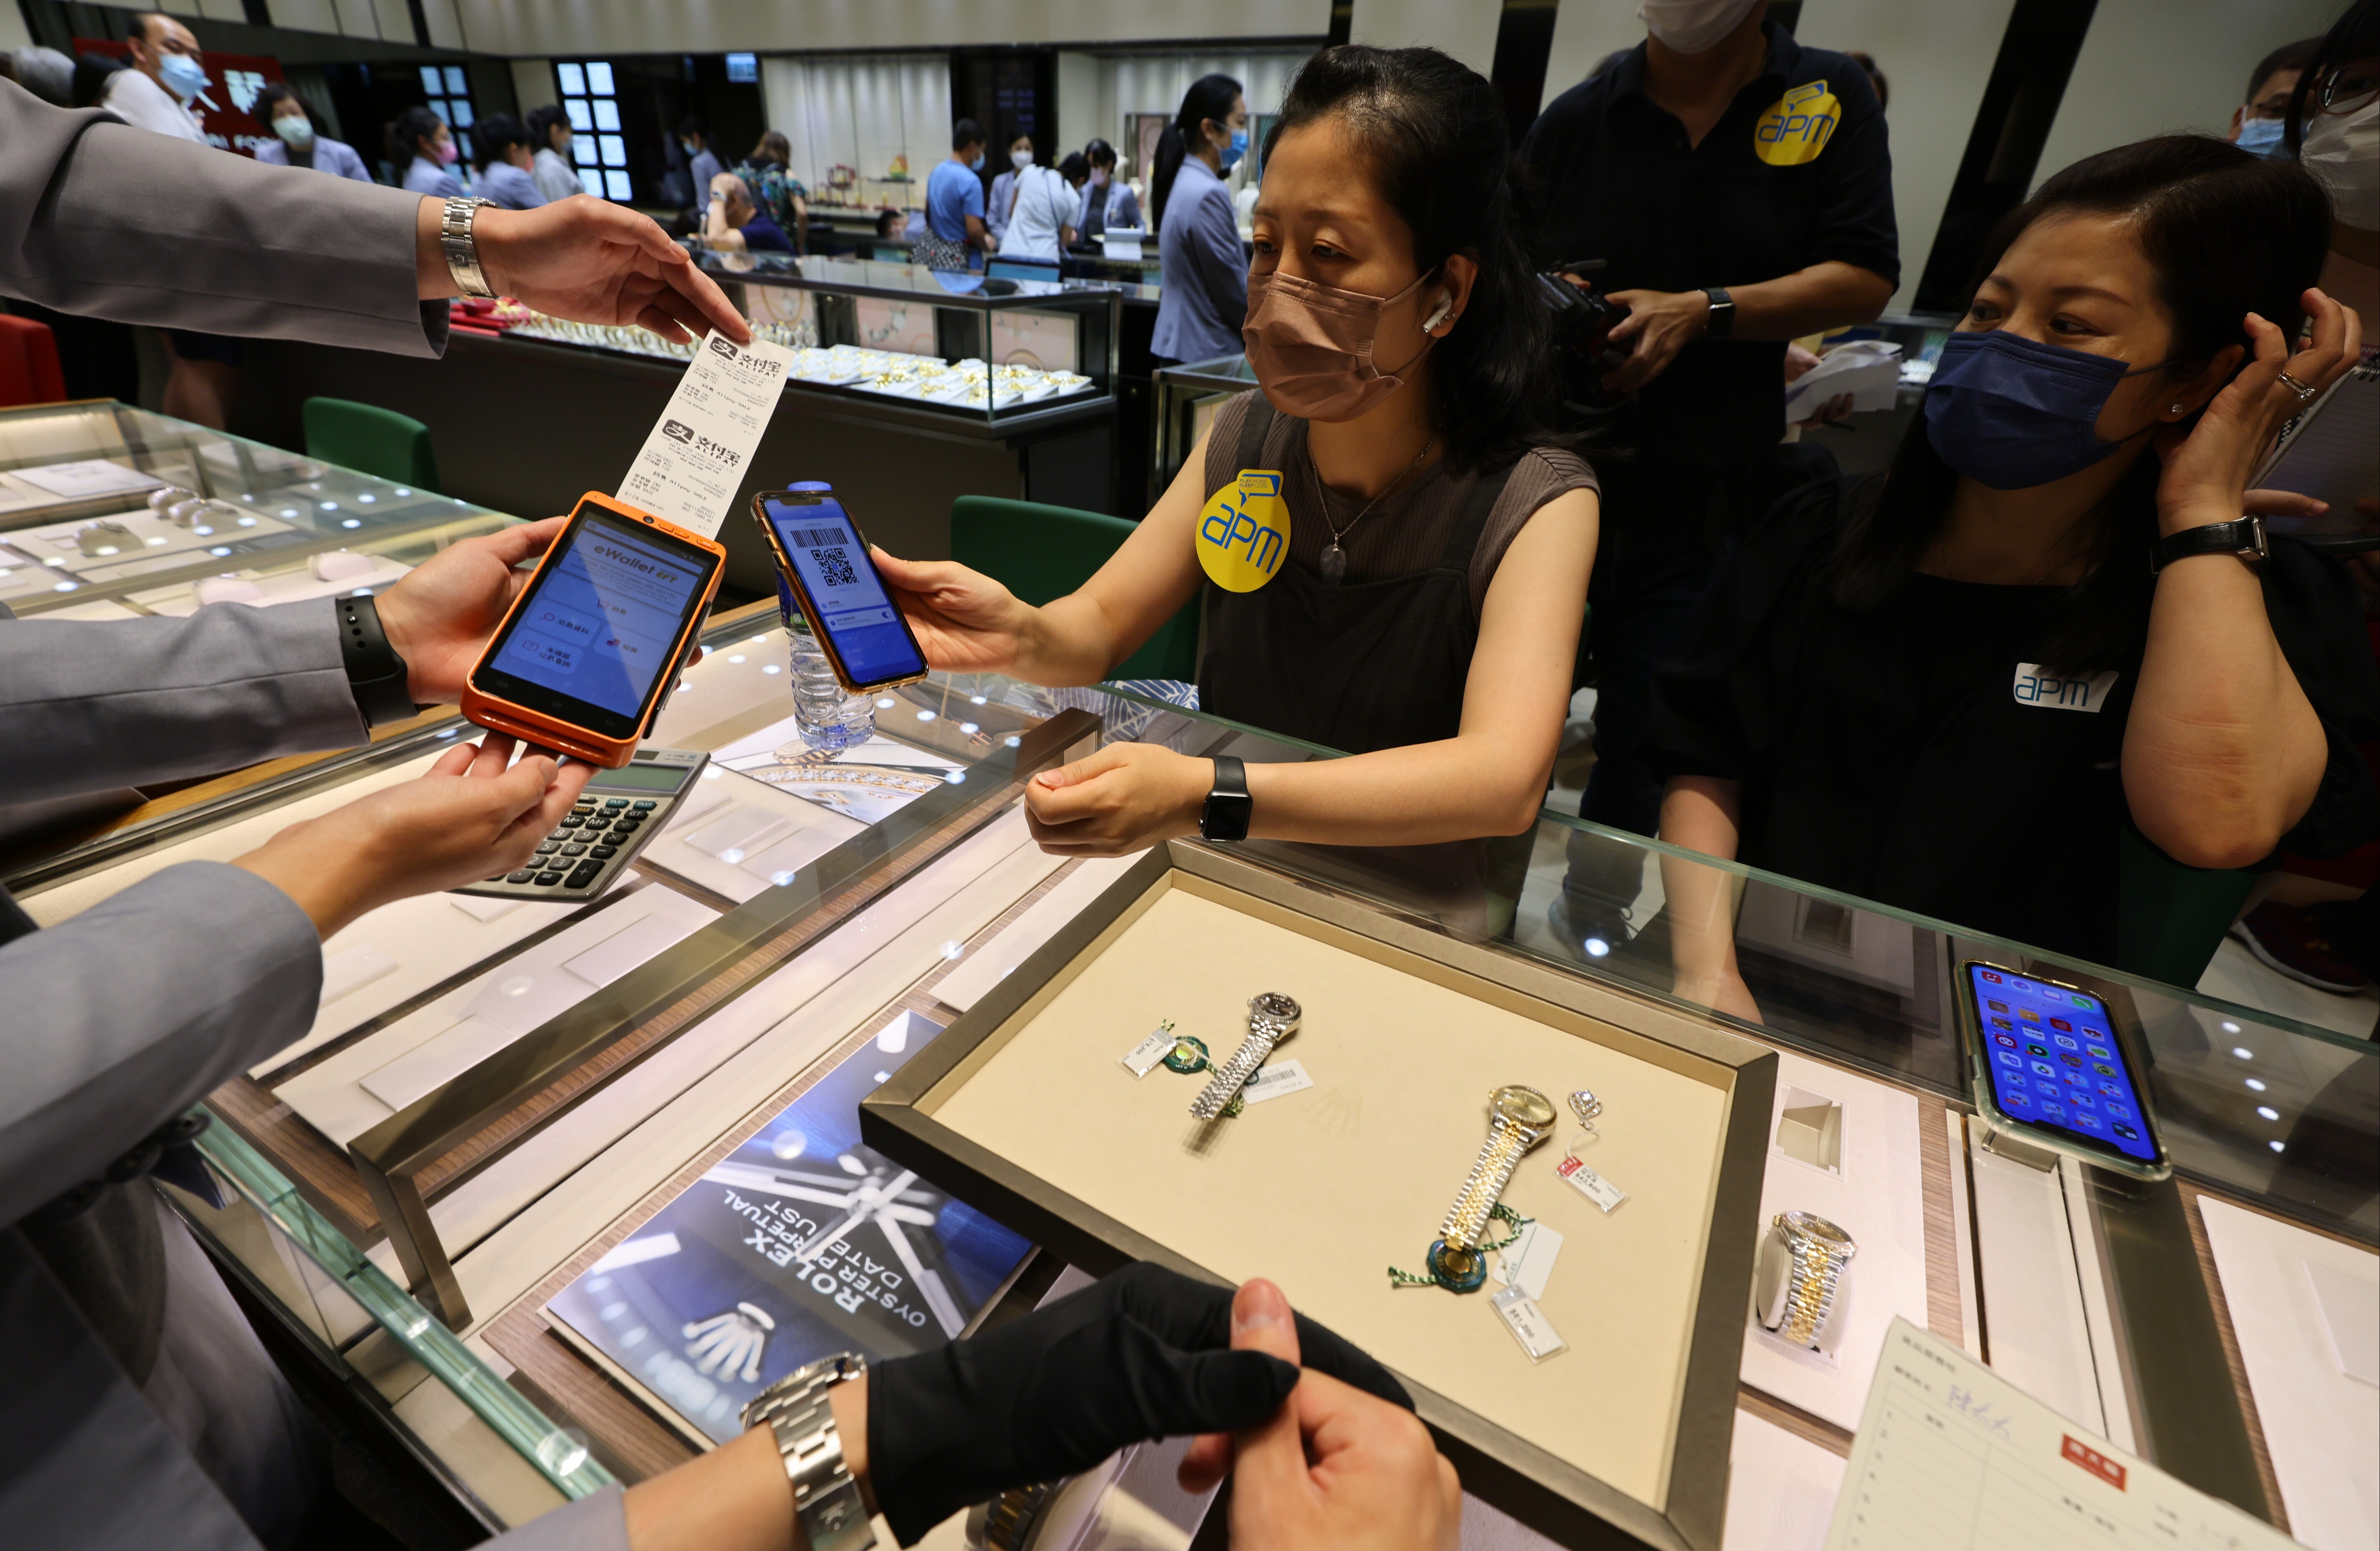 Sisters Pam (left) and Amy Yiu splash out on Rolex watches. Photo: Dickson Lee